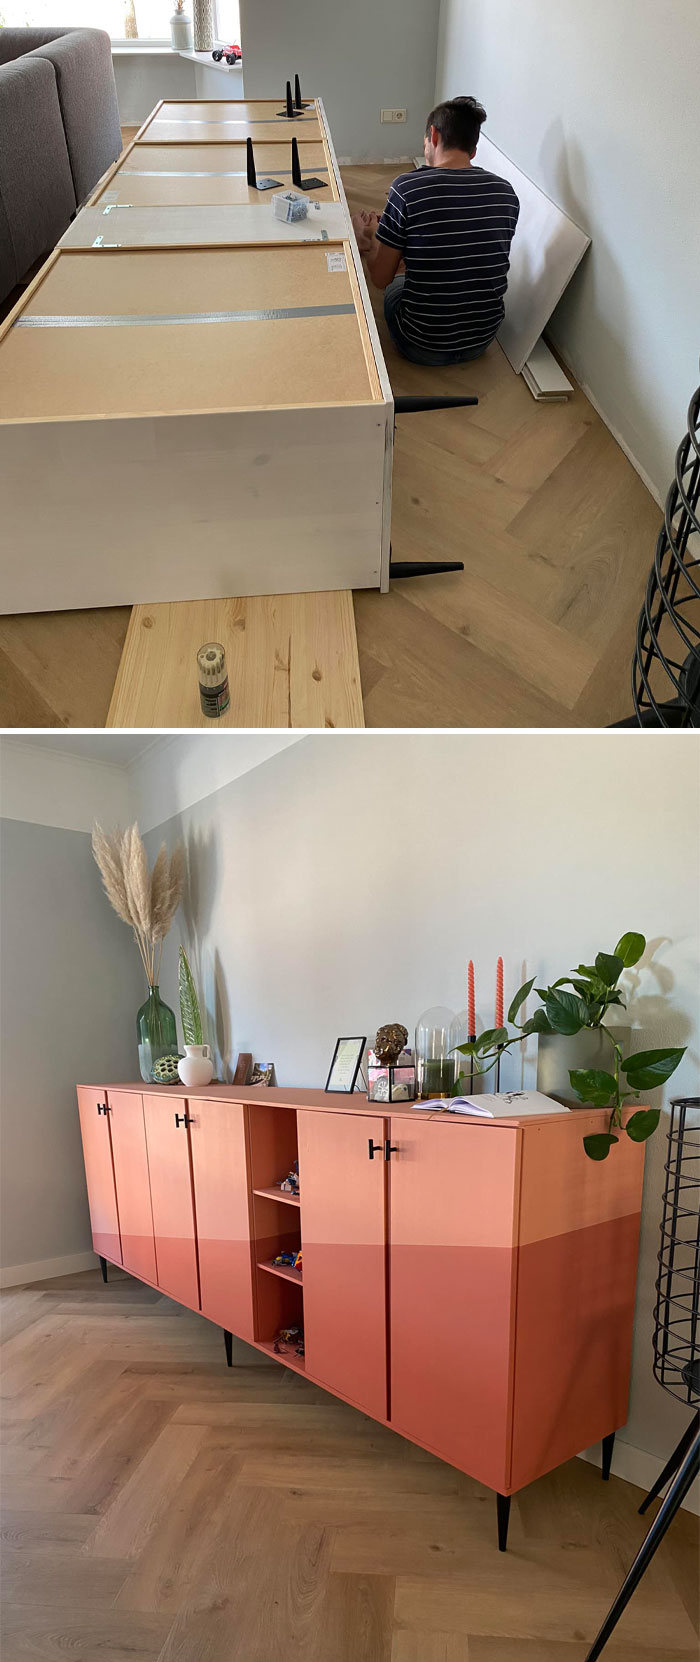 Made This Beautiful Dressoir Last Year From Three IKEA Ivar Cabinets